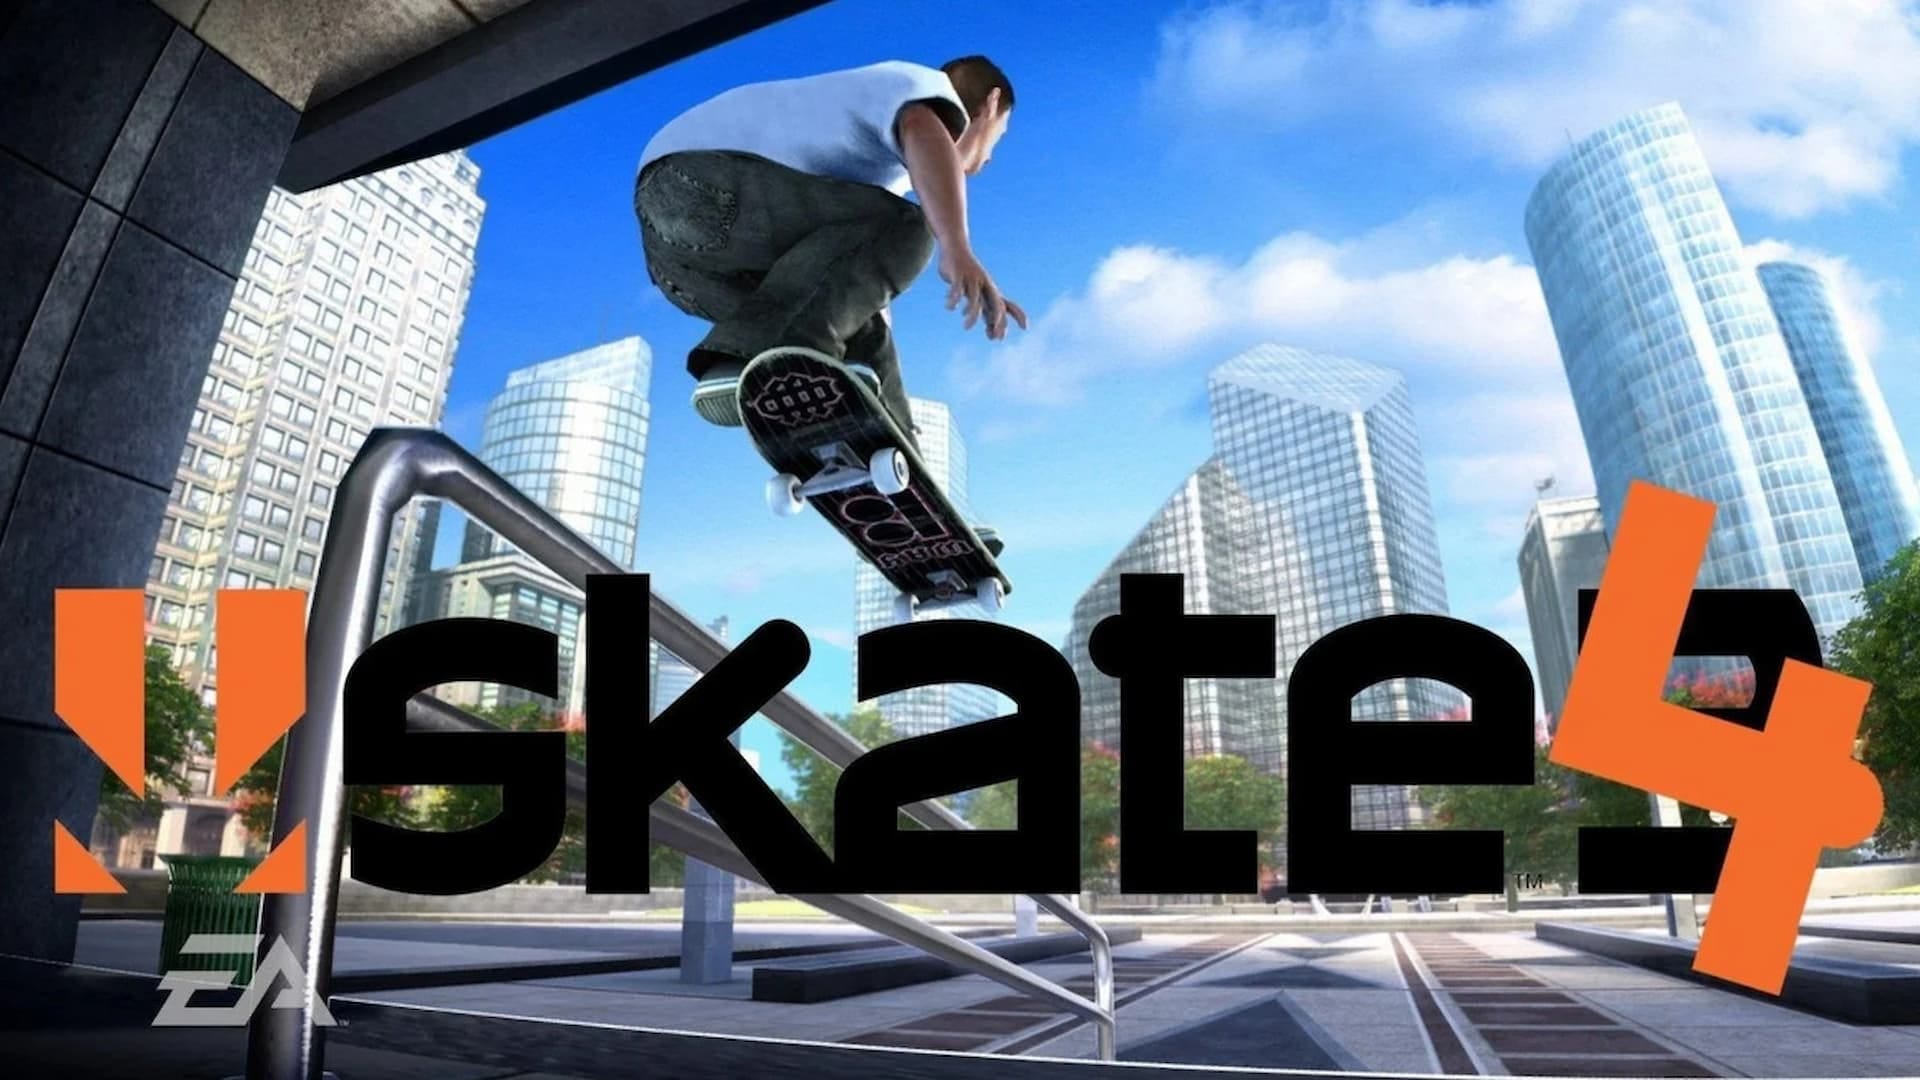 Skate 4 game footage leaks but you're better off not watching it